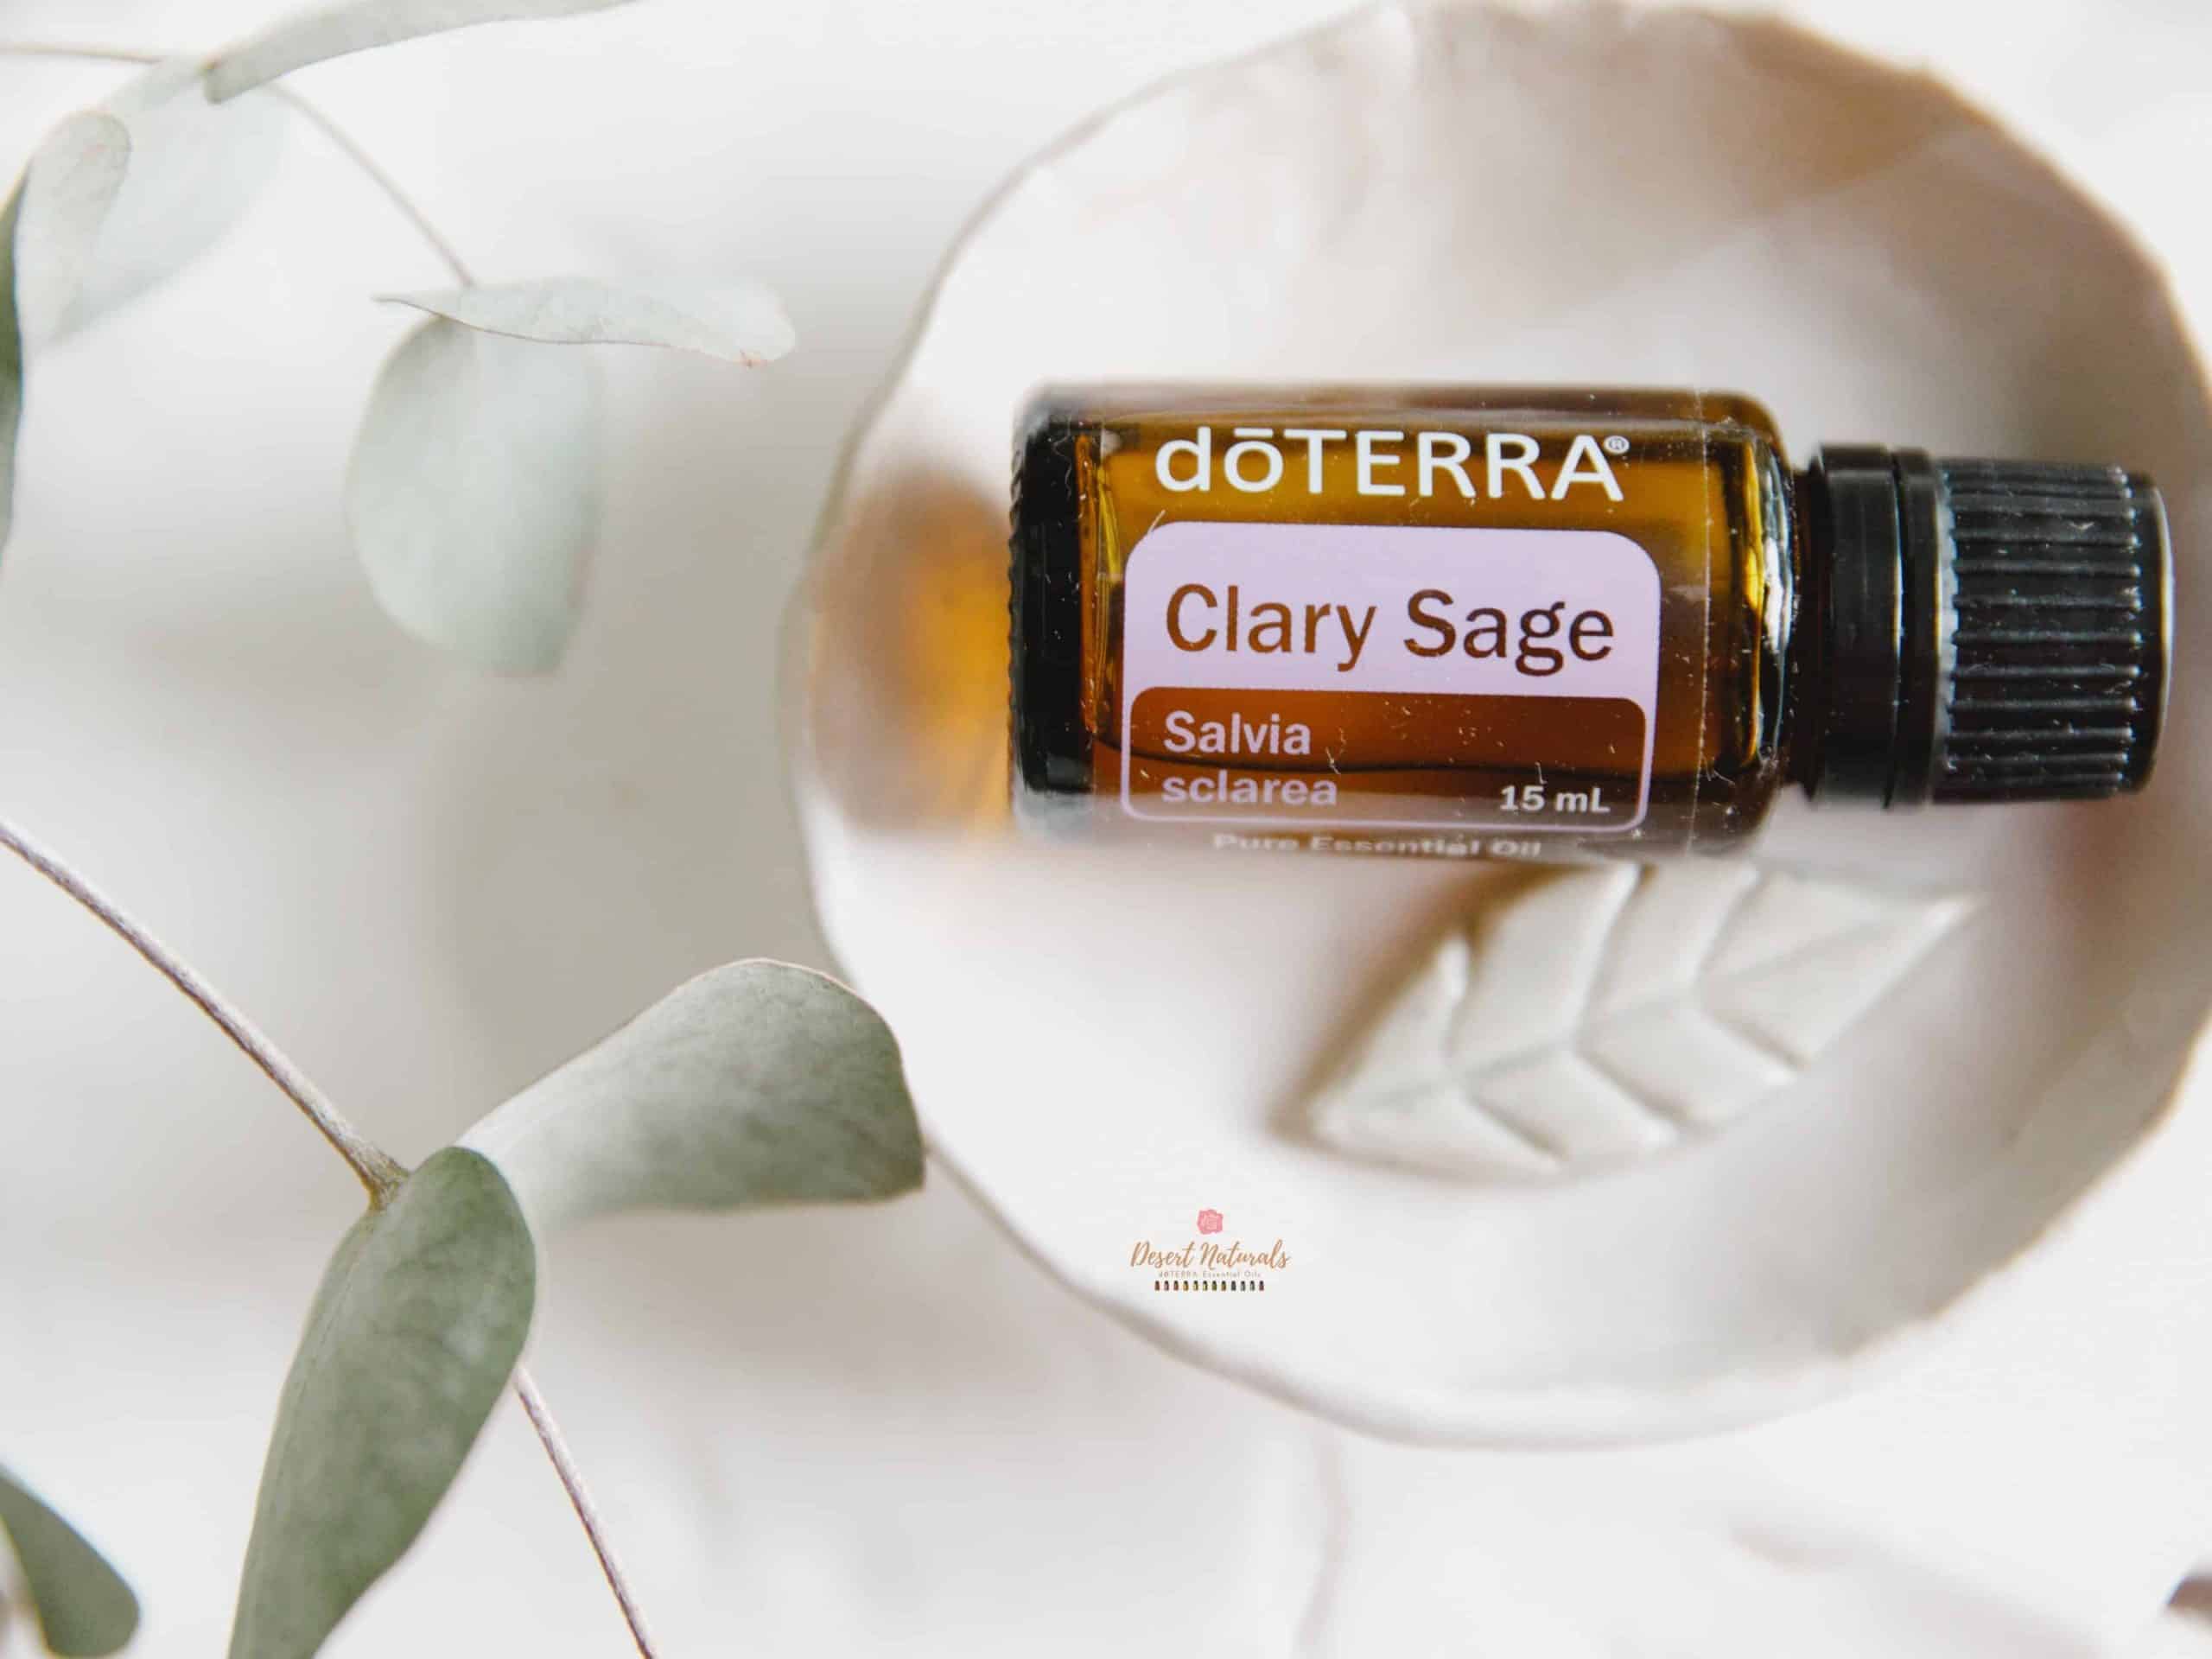 bottle of doterra clary sage on small decorate white plate with green sprig